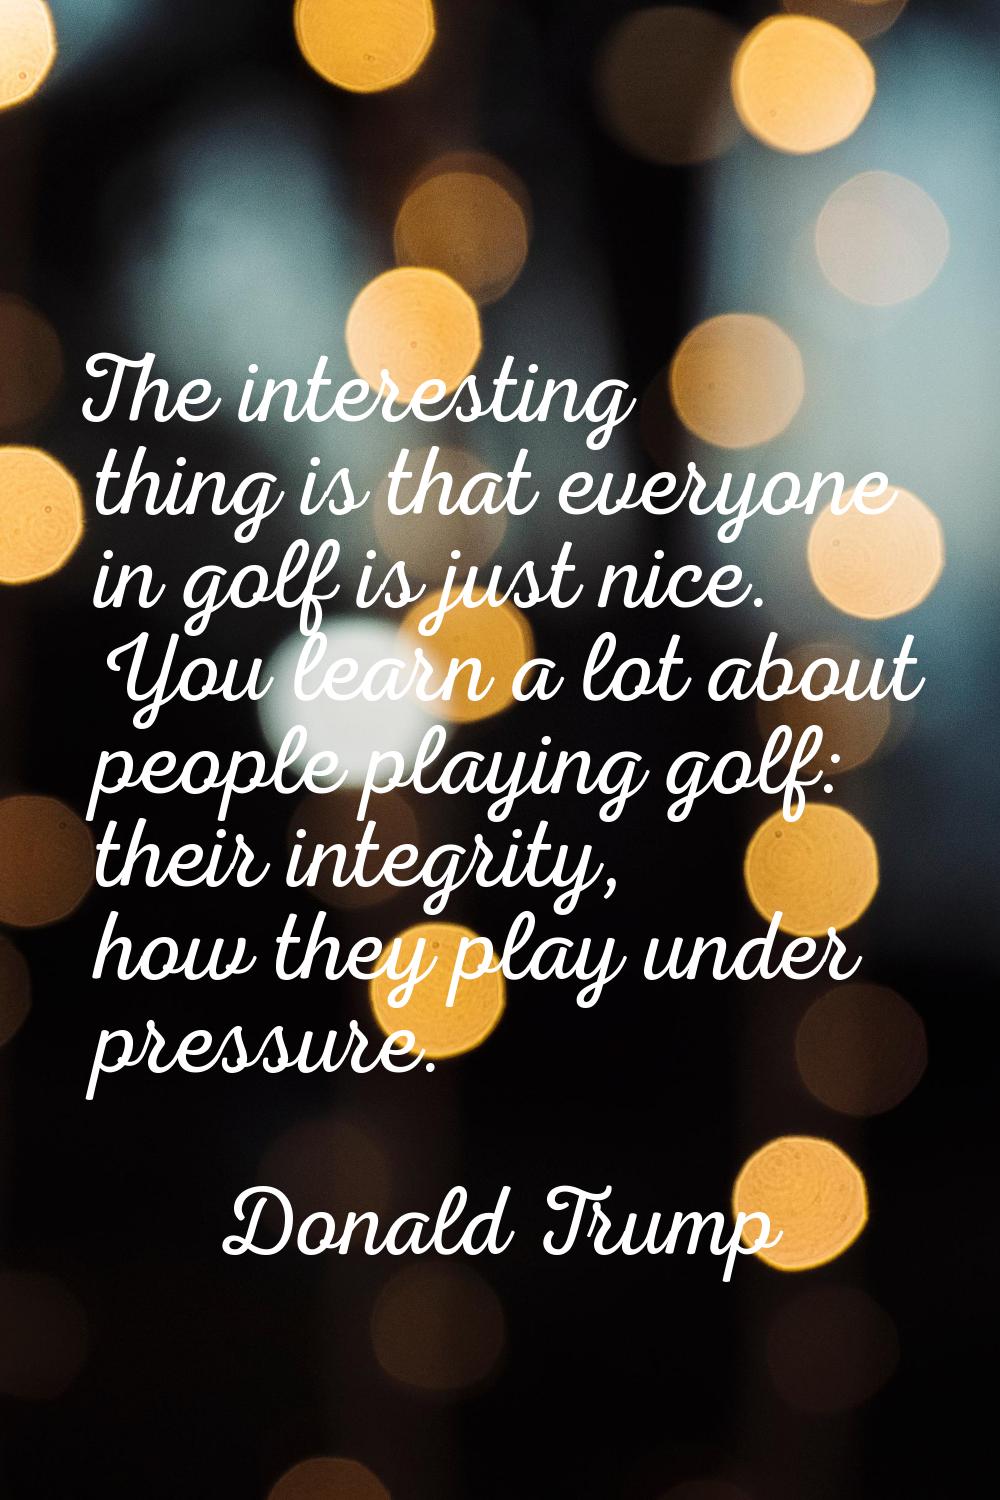 The interesting thing is that everyone in golf is just nice. You learn a lot about people playing g